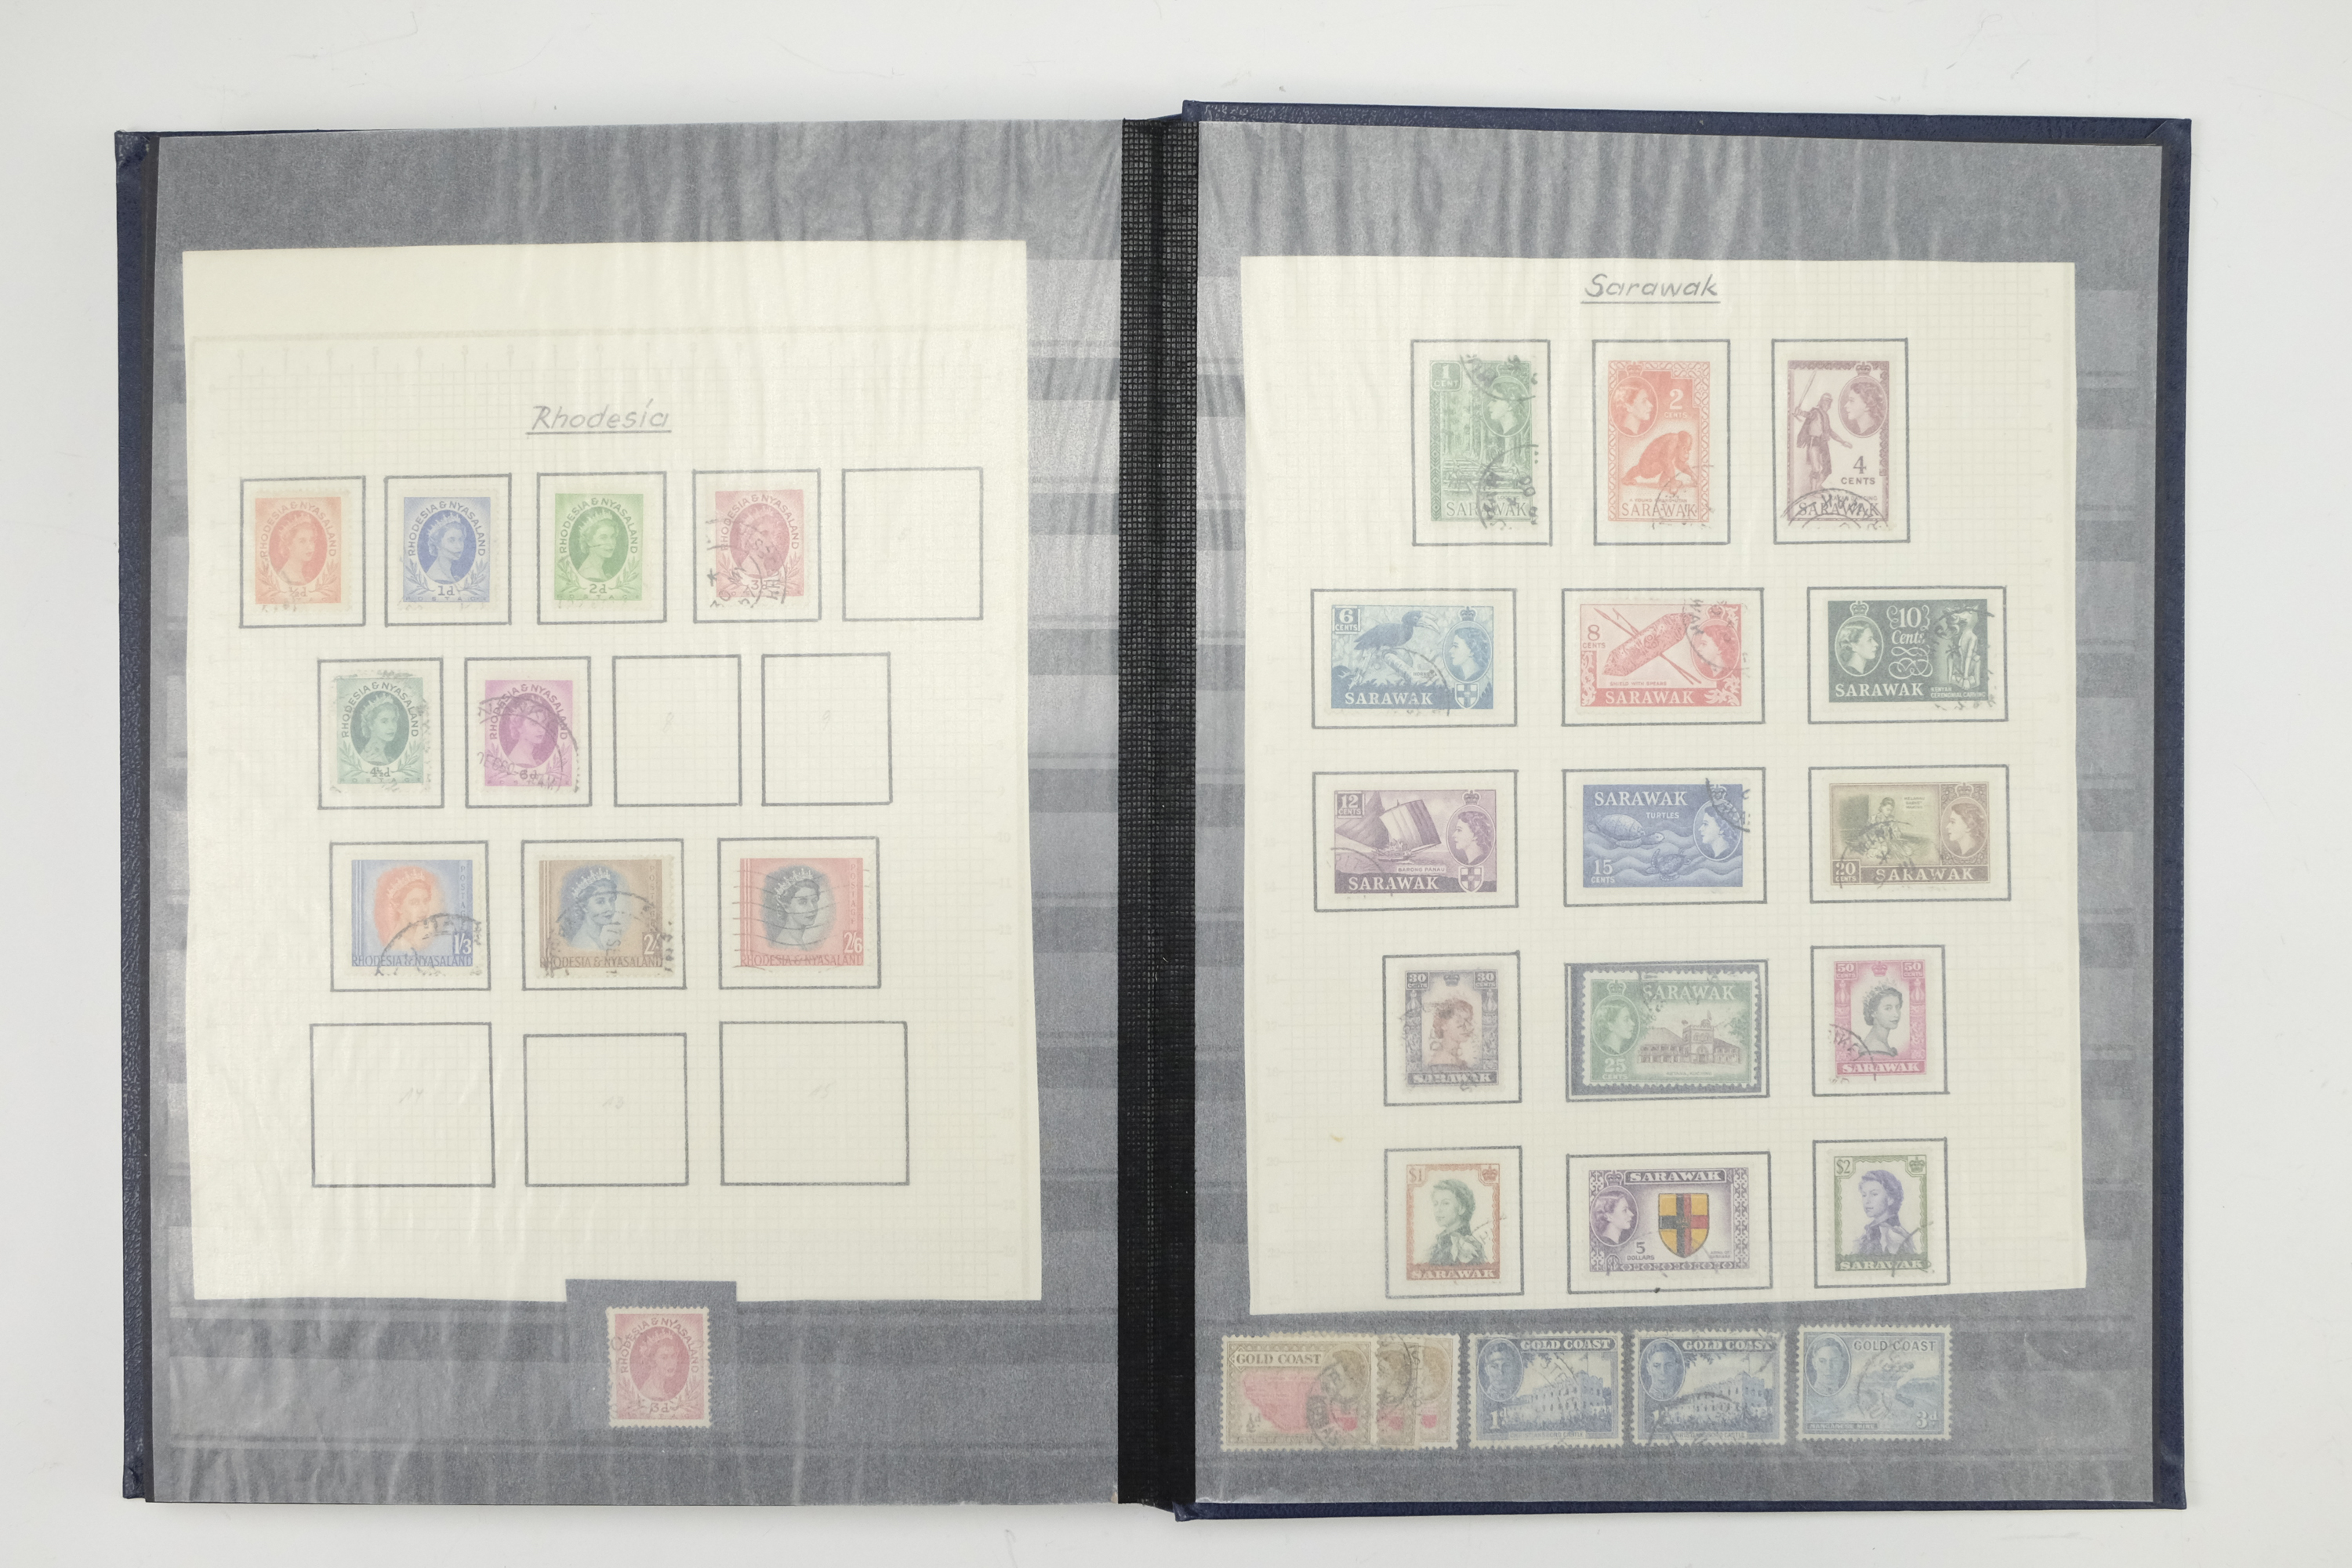 Five hingeless albums of world stamps, including an album of aircraft commemoratives, India, Cuba, - Image 30 of 53